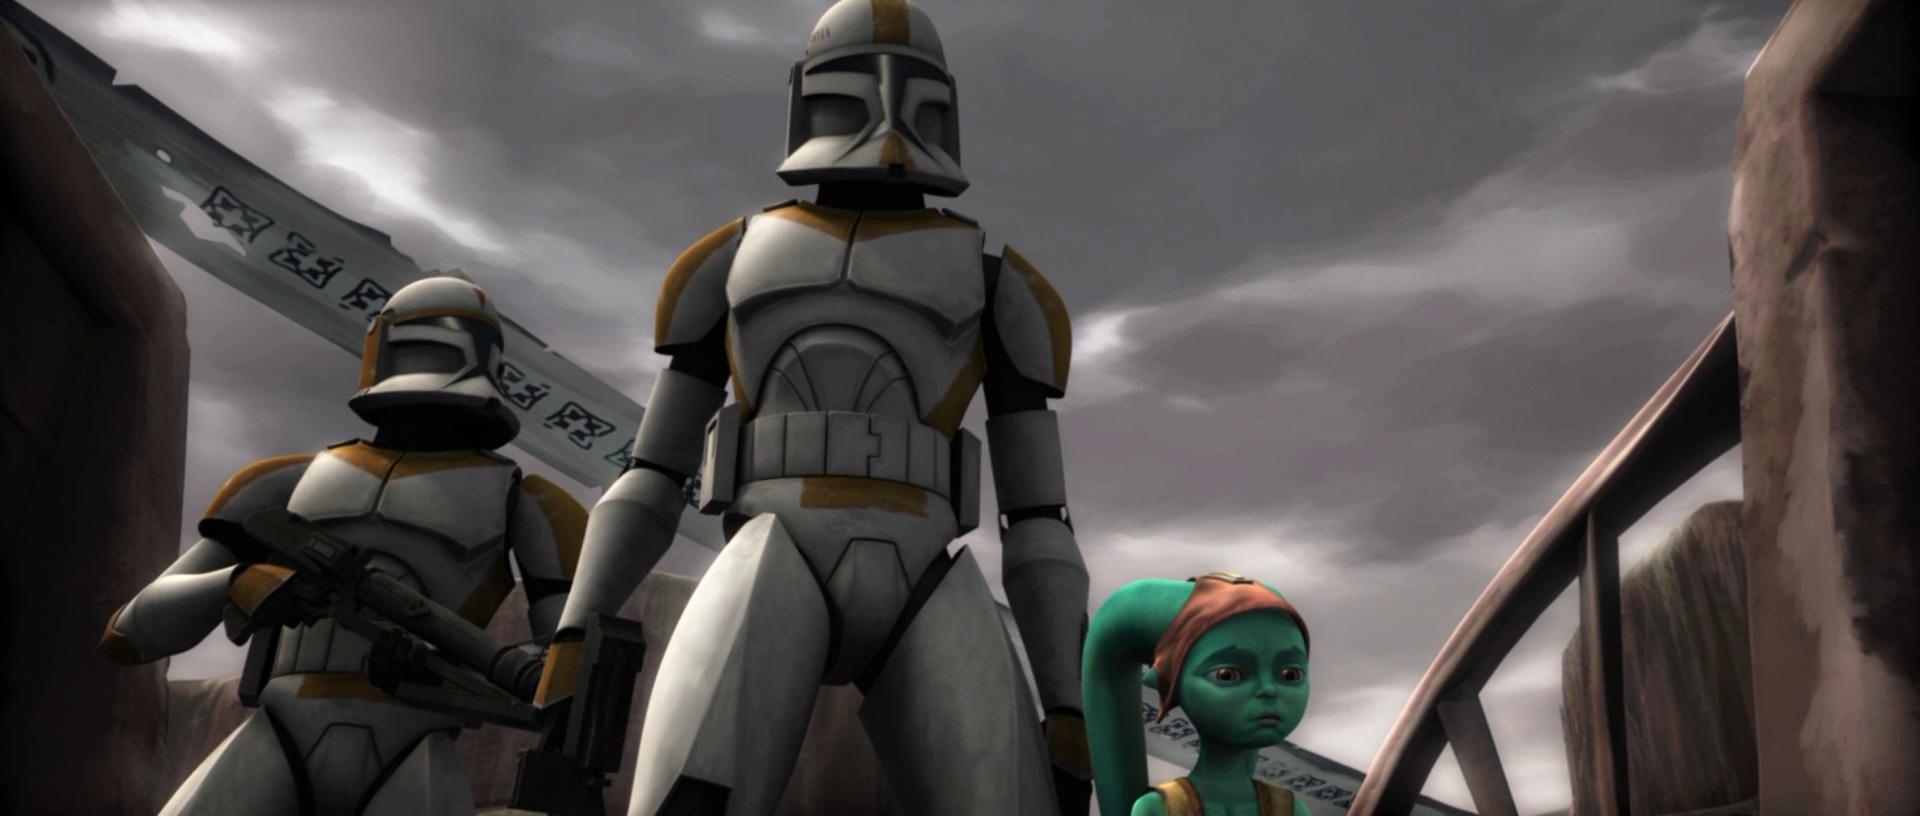 Star Wars: The Clone Wars Innocents of Ryloth (TV Episode 2009)